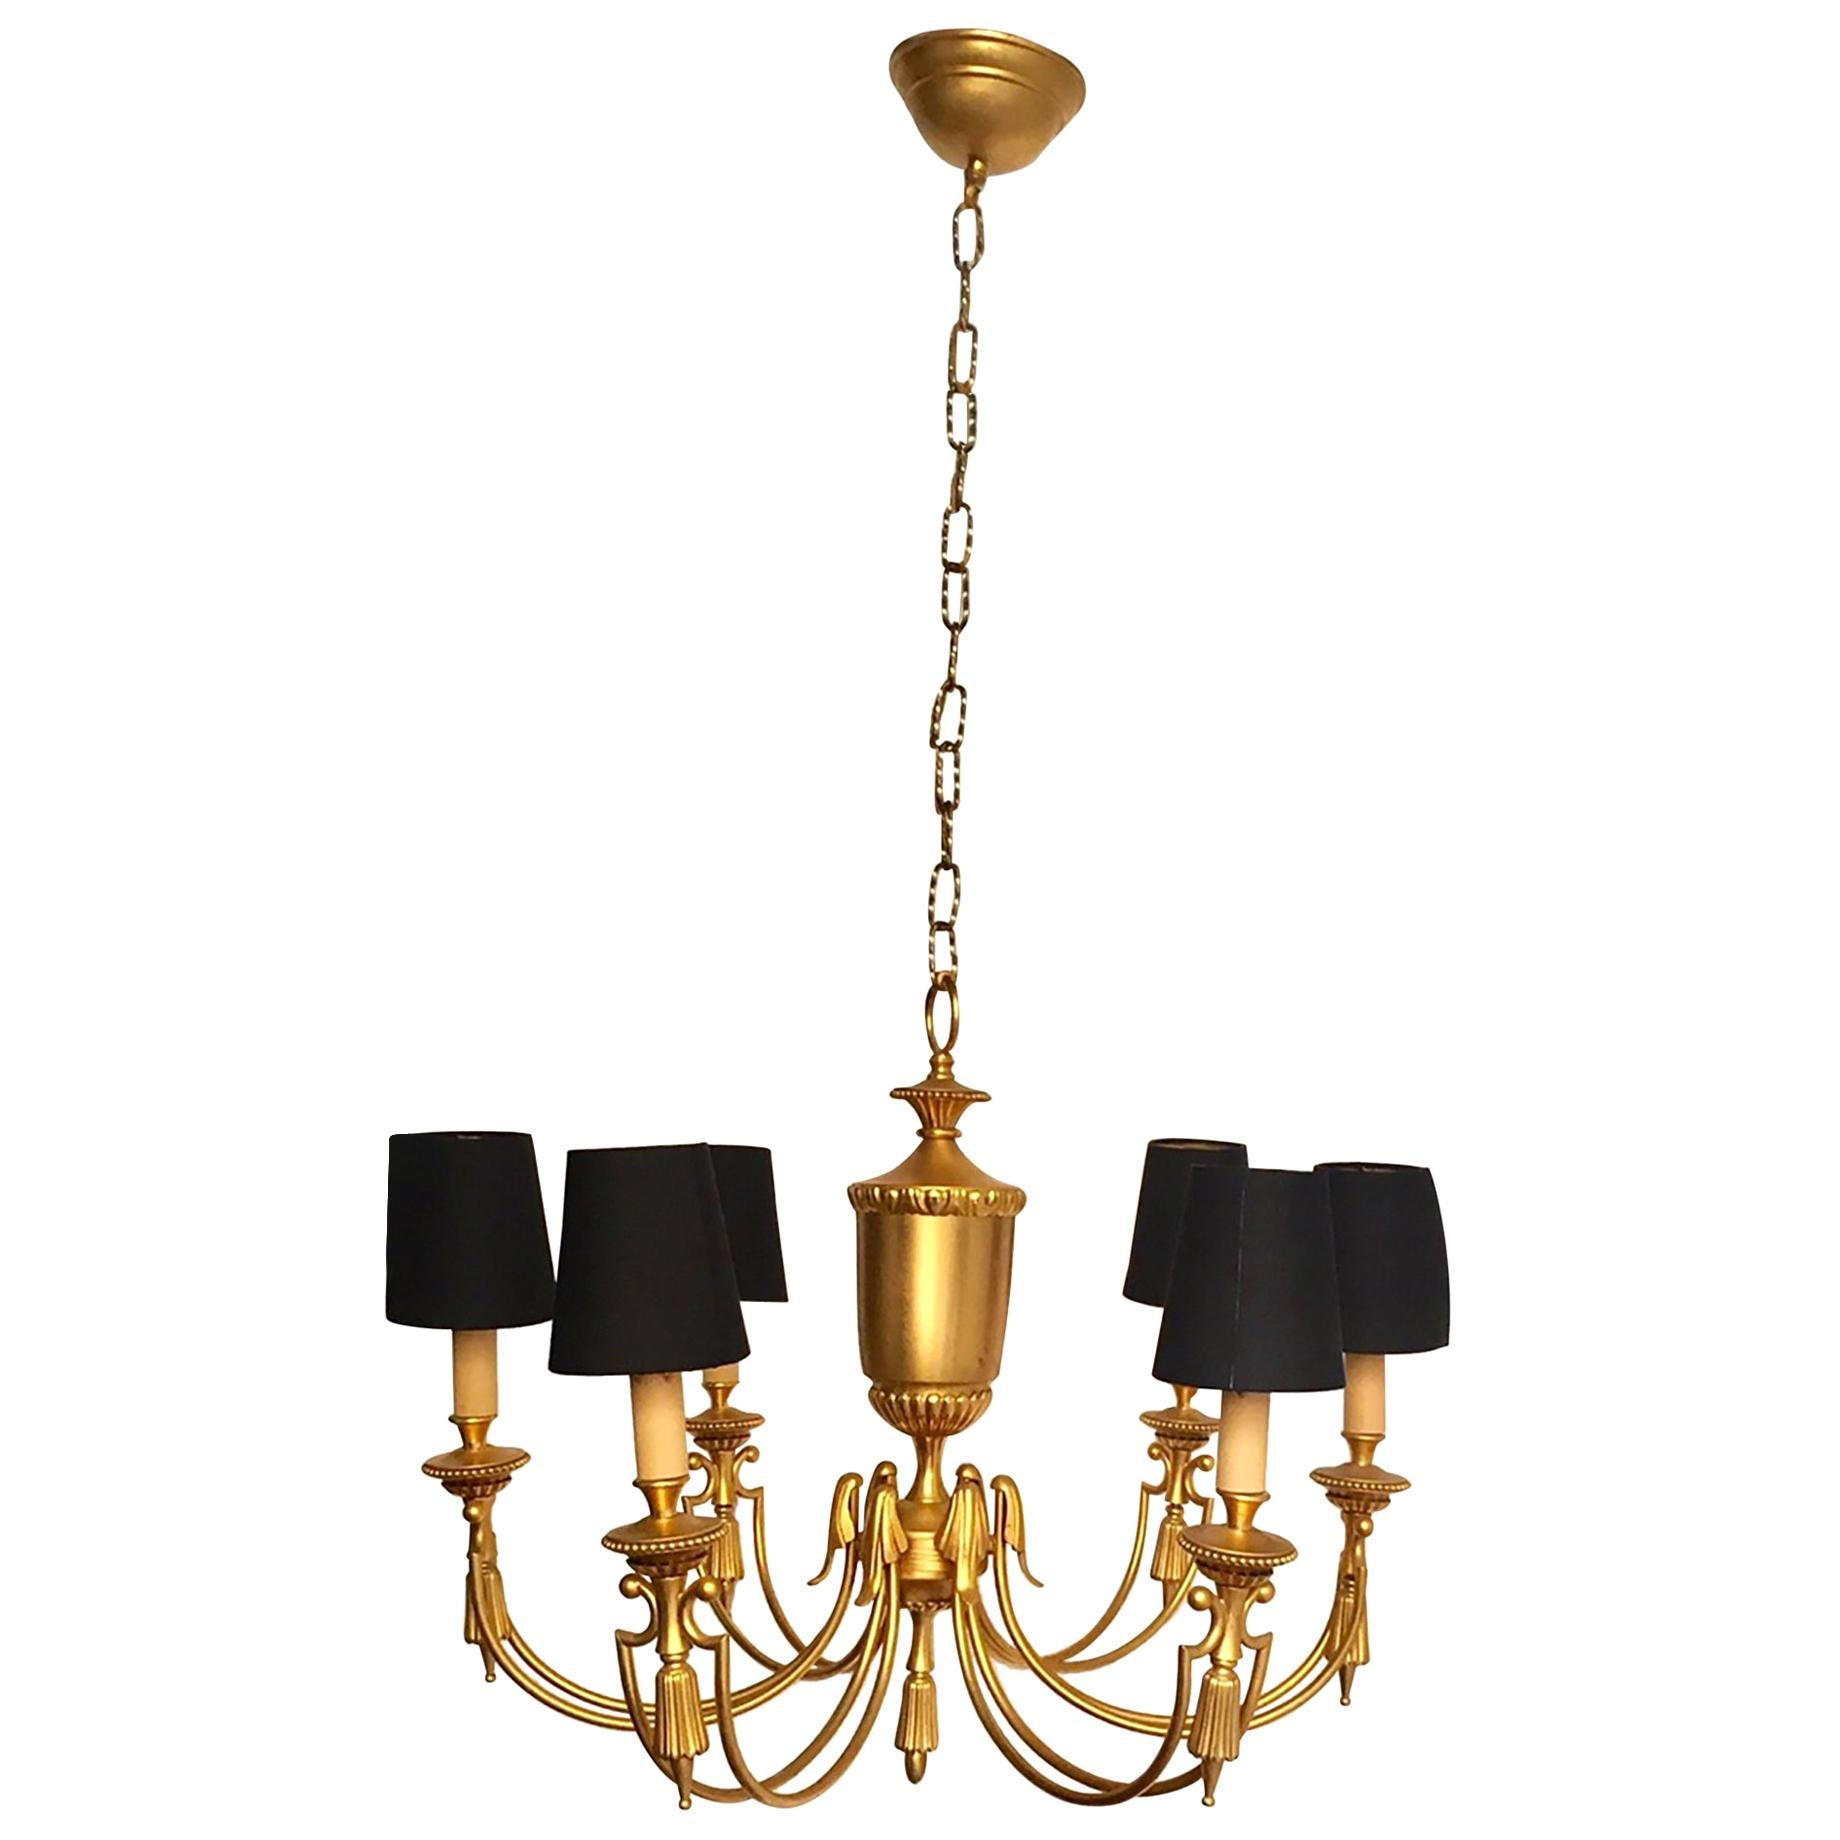 French Midcentury Gilt Metal Maison Jansen Style Chandelier For Sale